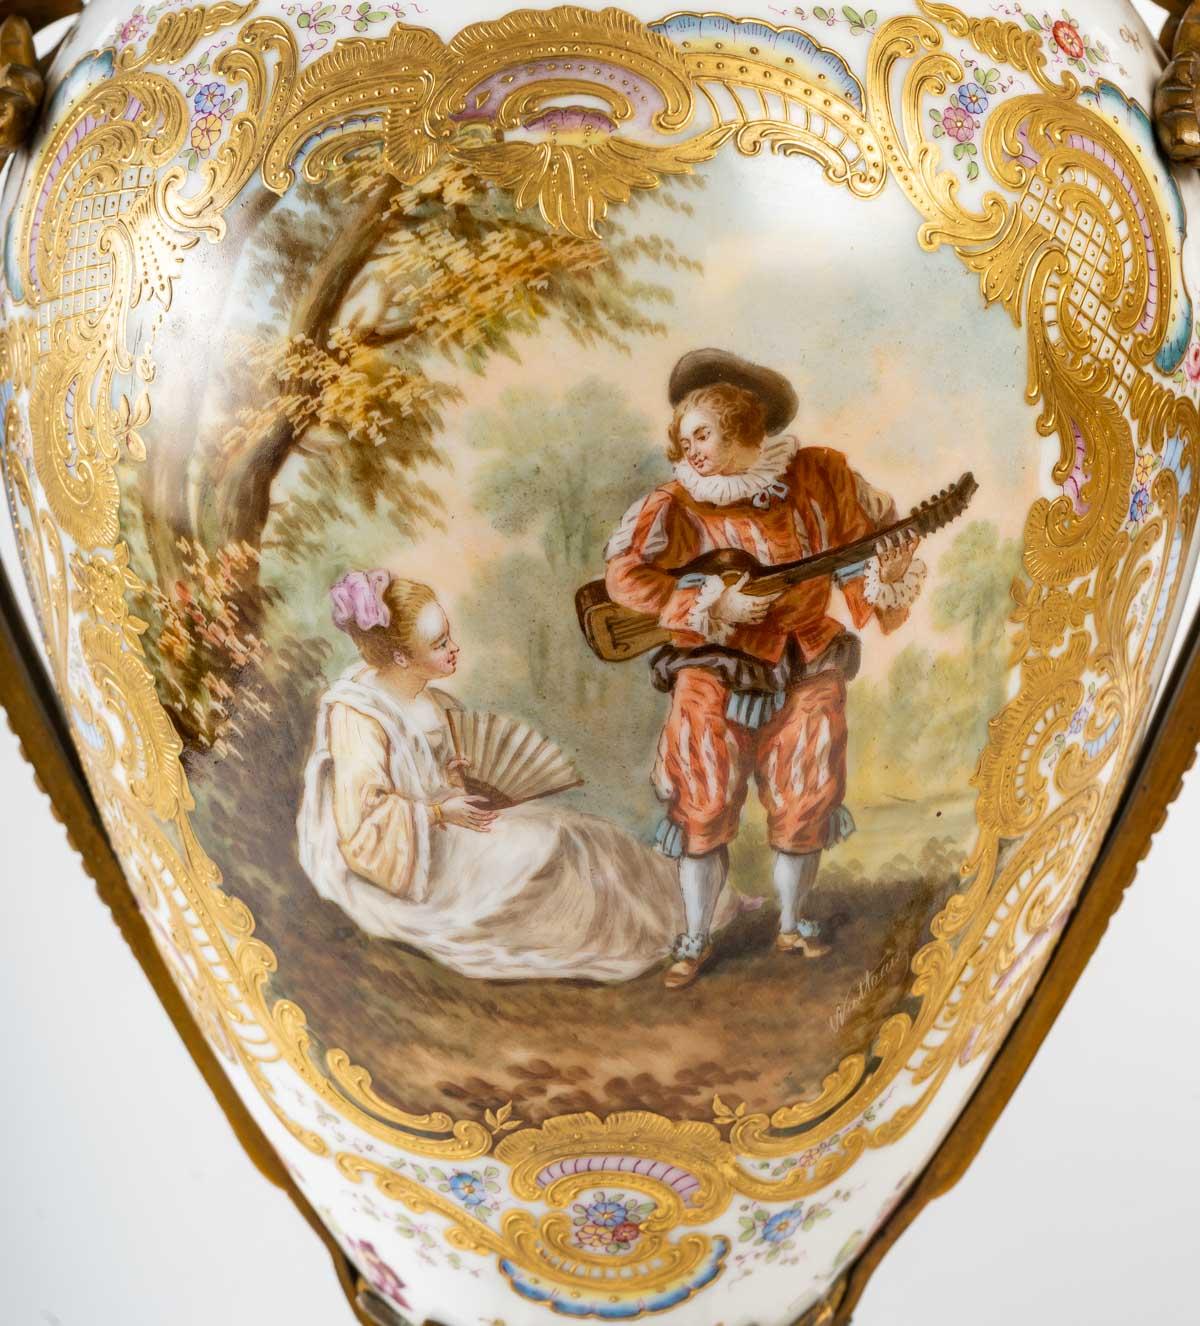 Napoleon III Pair of Sèvres porcelain covered vases, 19th century